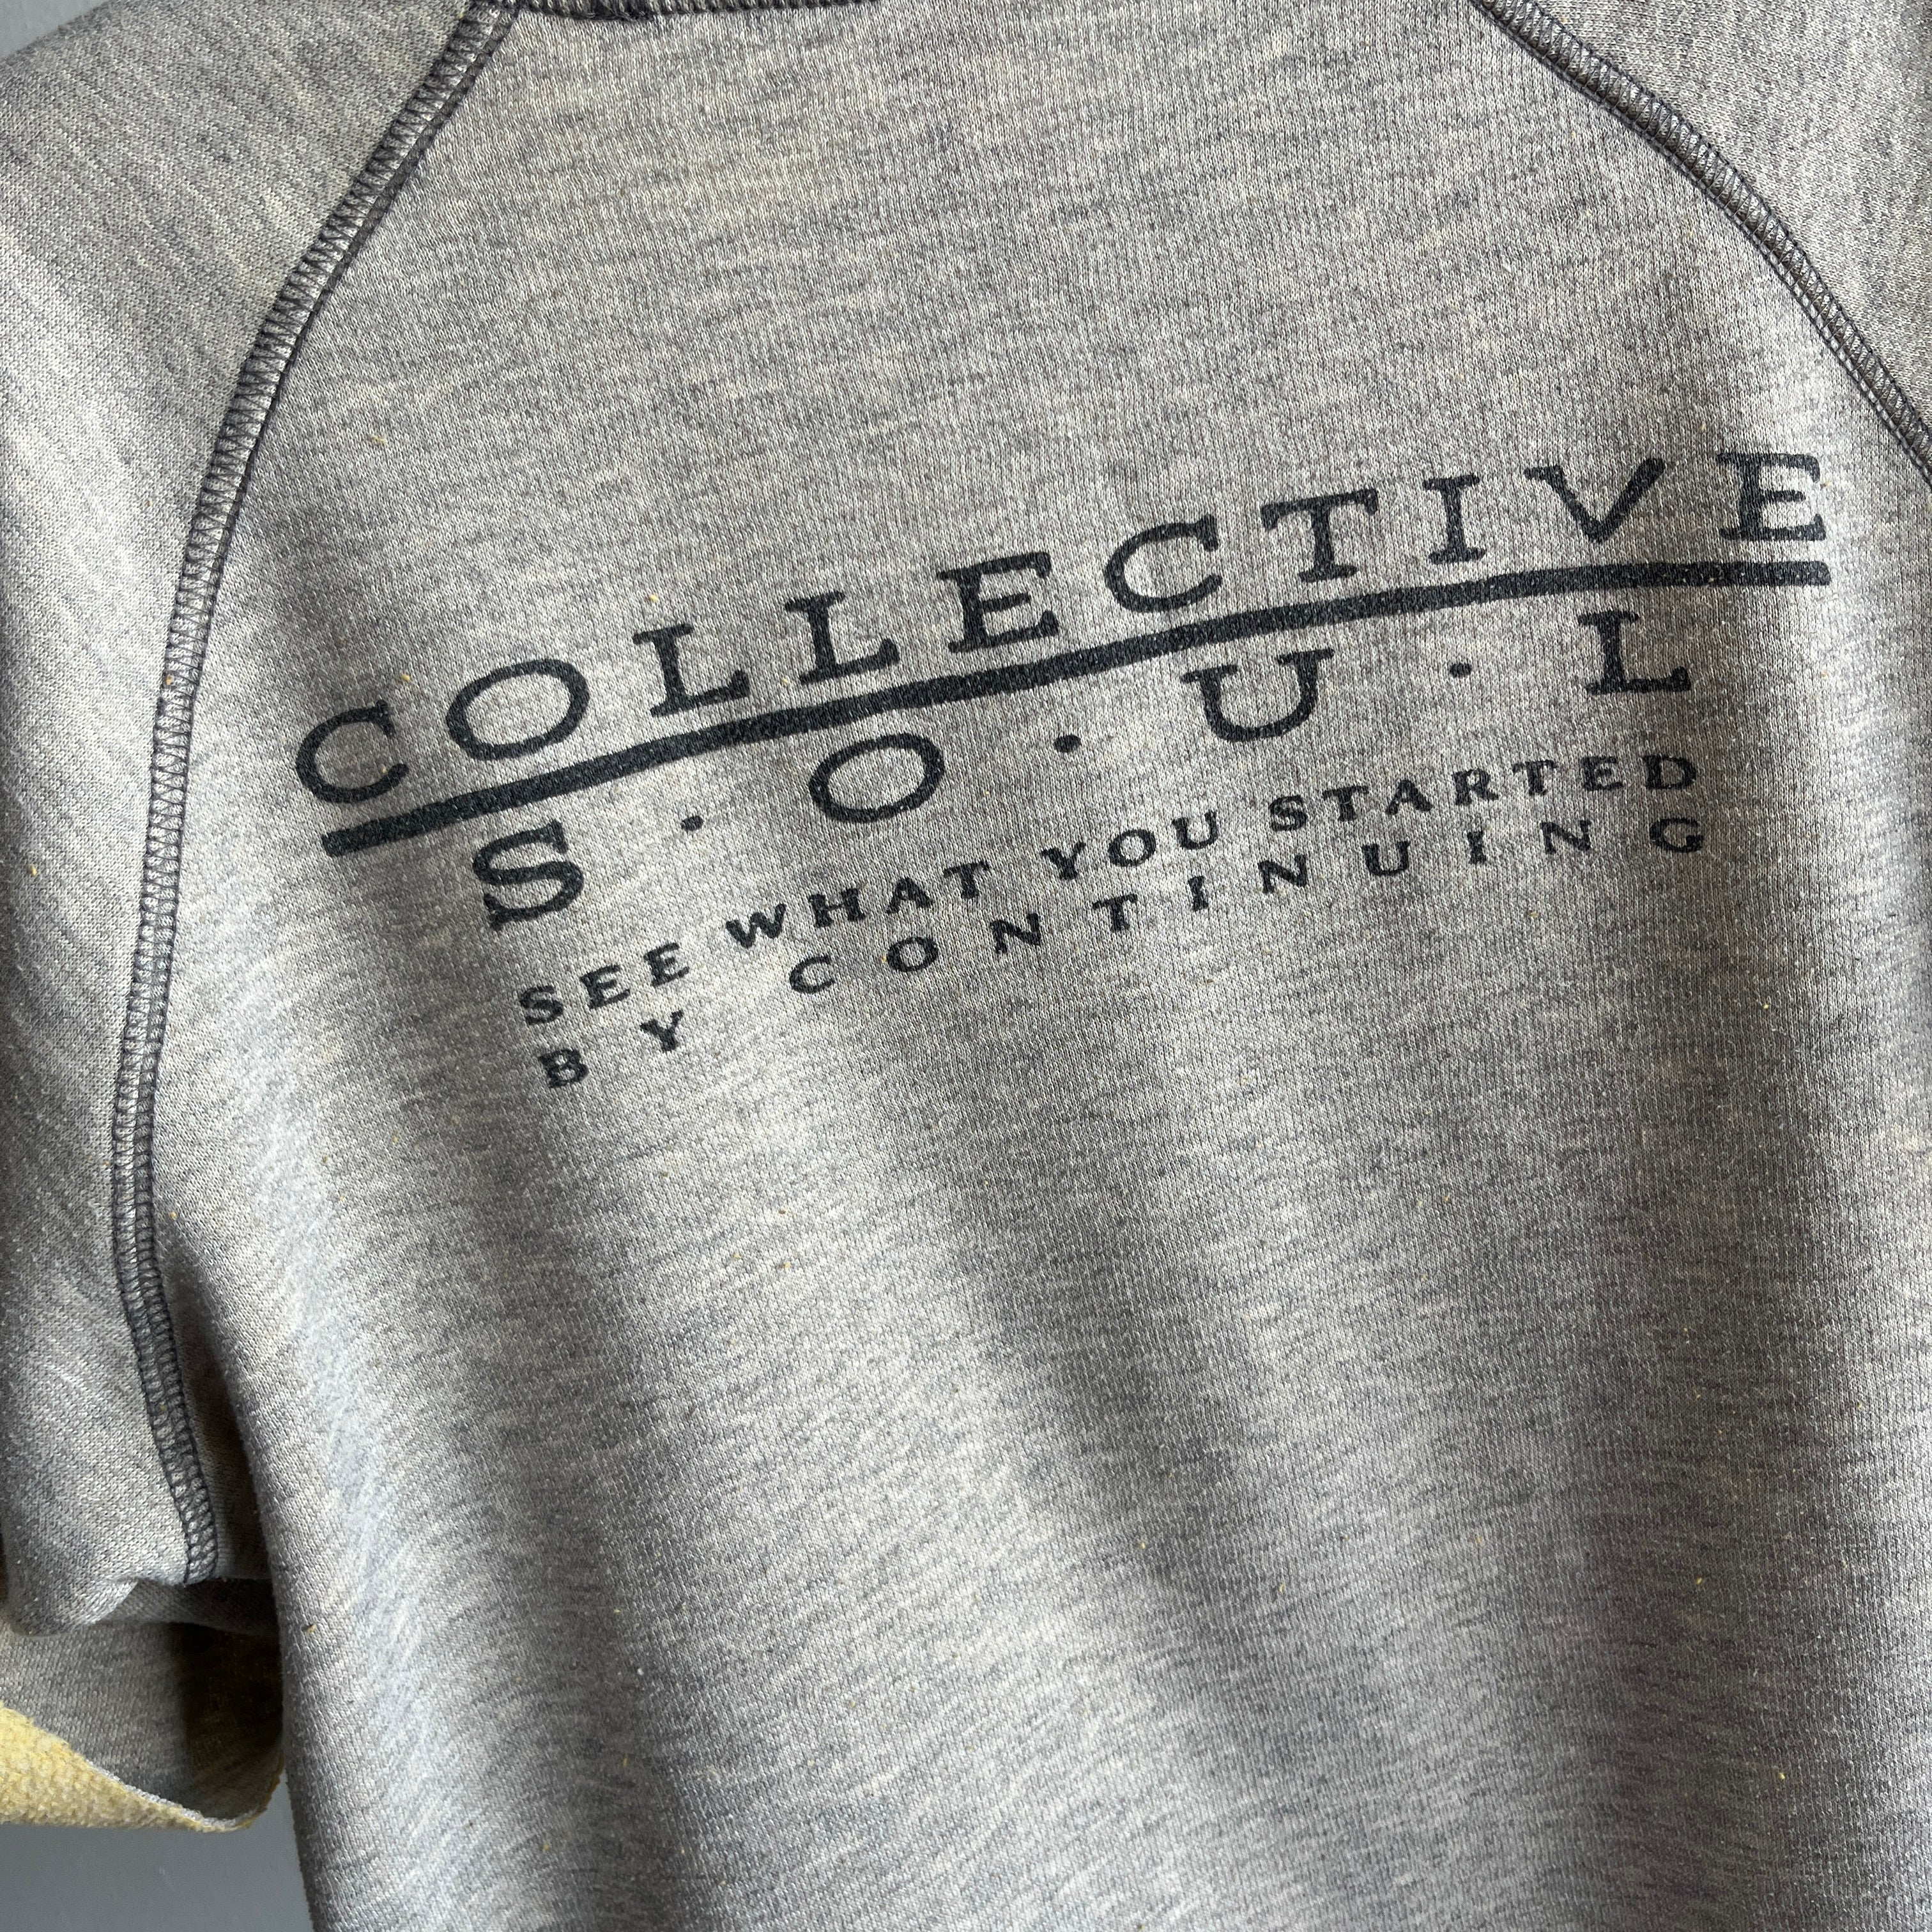 2015 Collective Soul - USA Made Cut Sleeve Warm Up - Not Vintage, but COOL